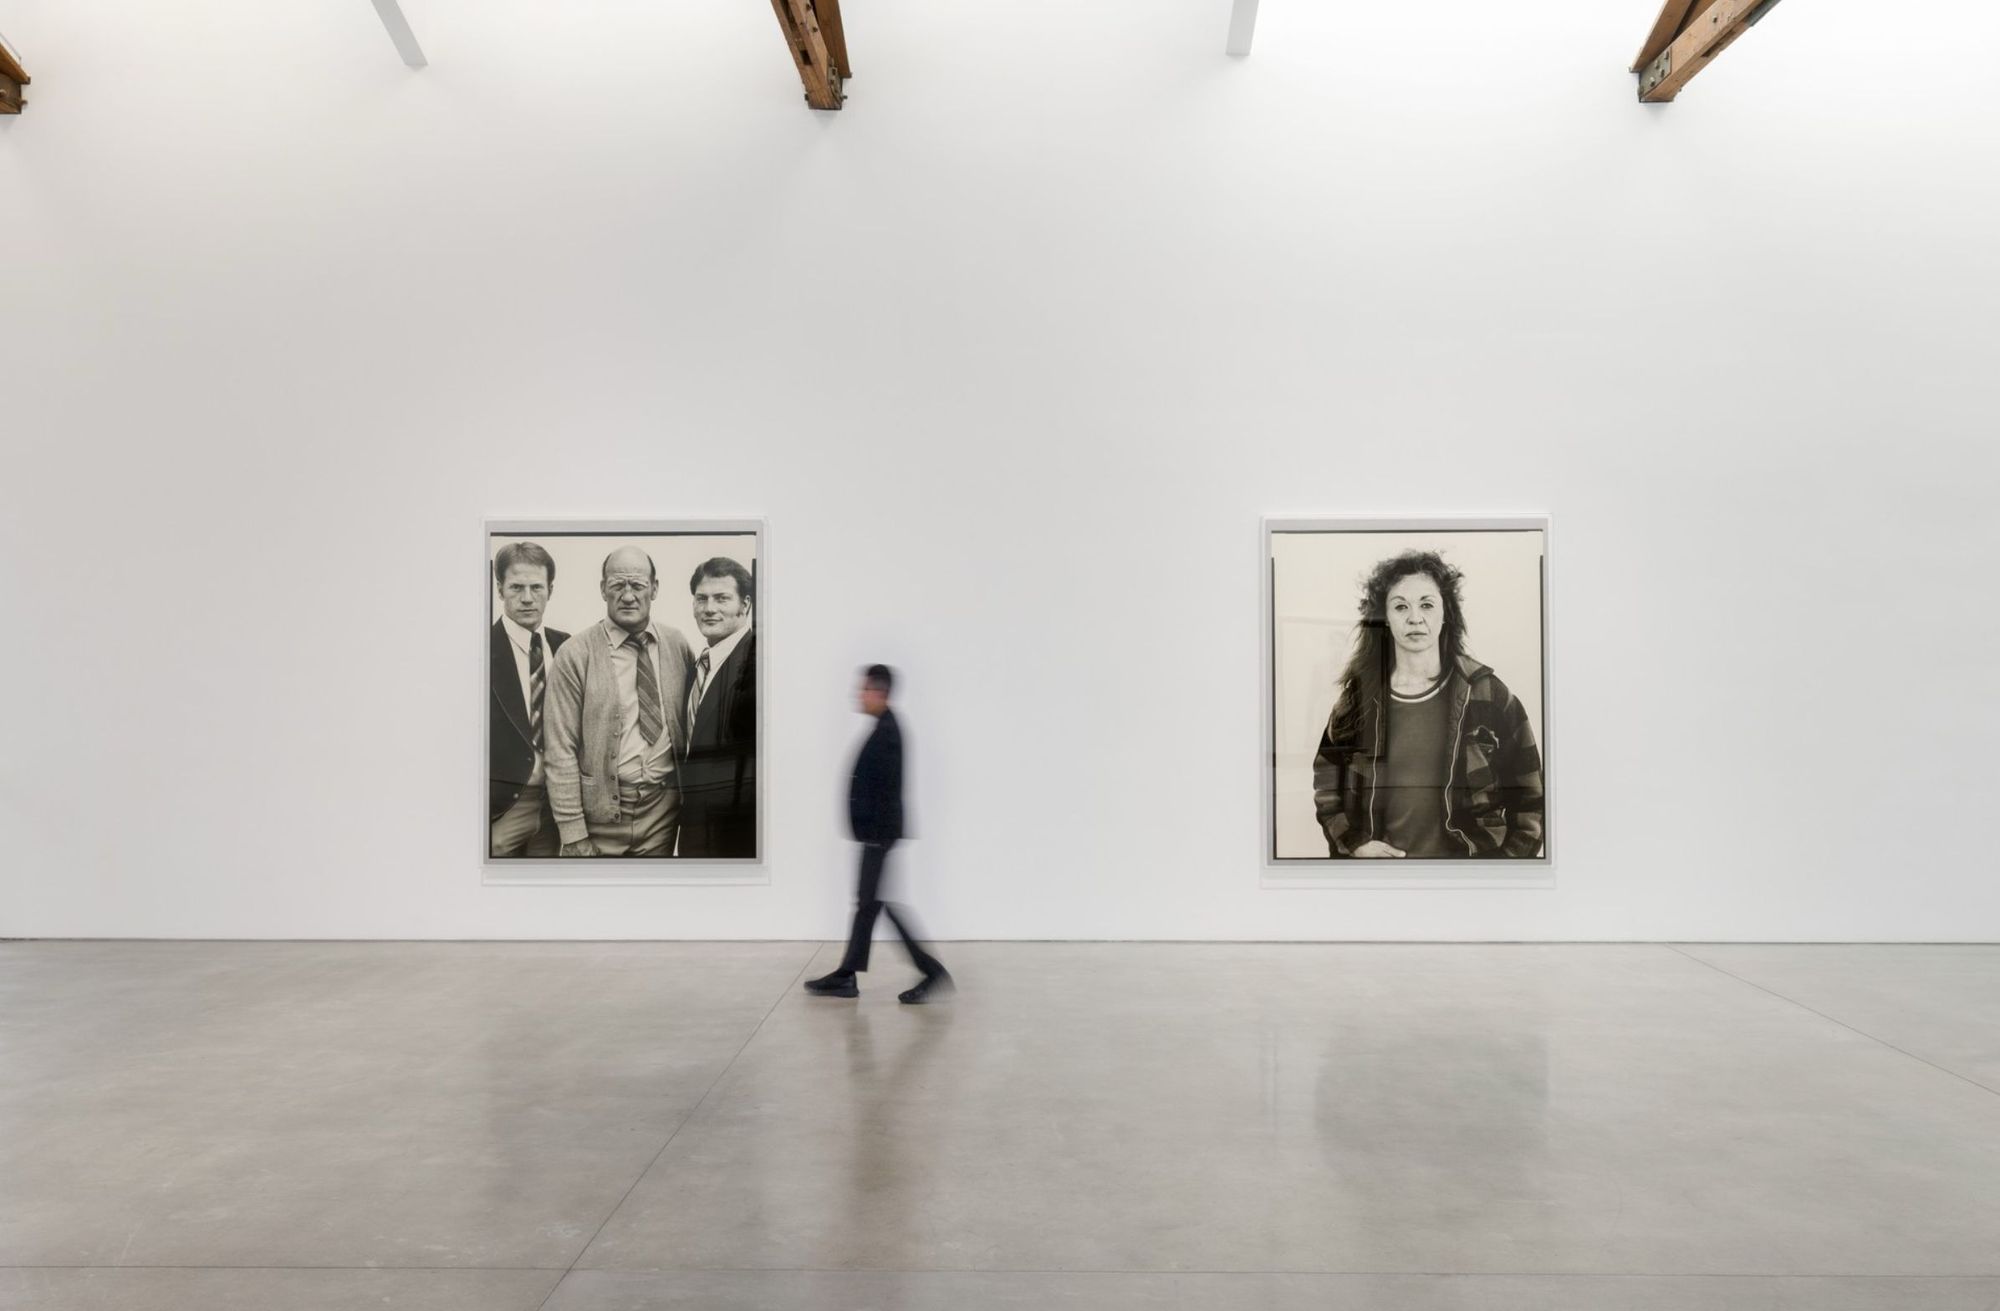 Richard Avedon, 'Ten Exhibition Prints from In the American West